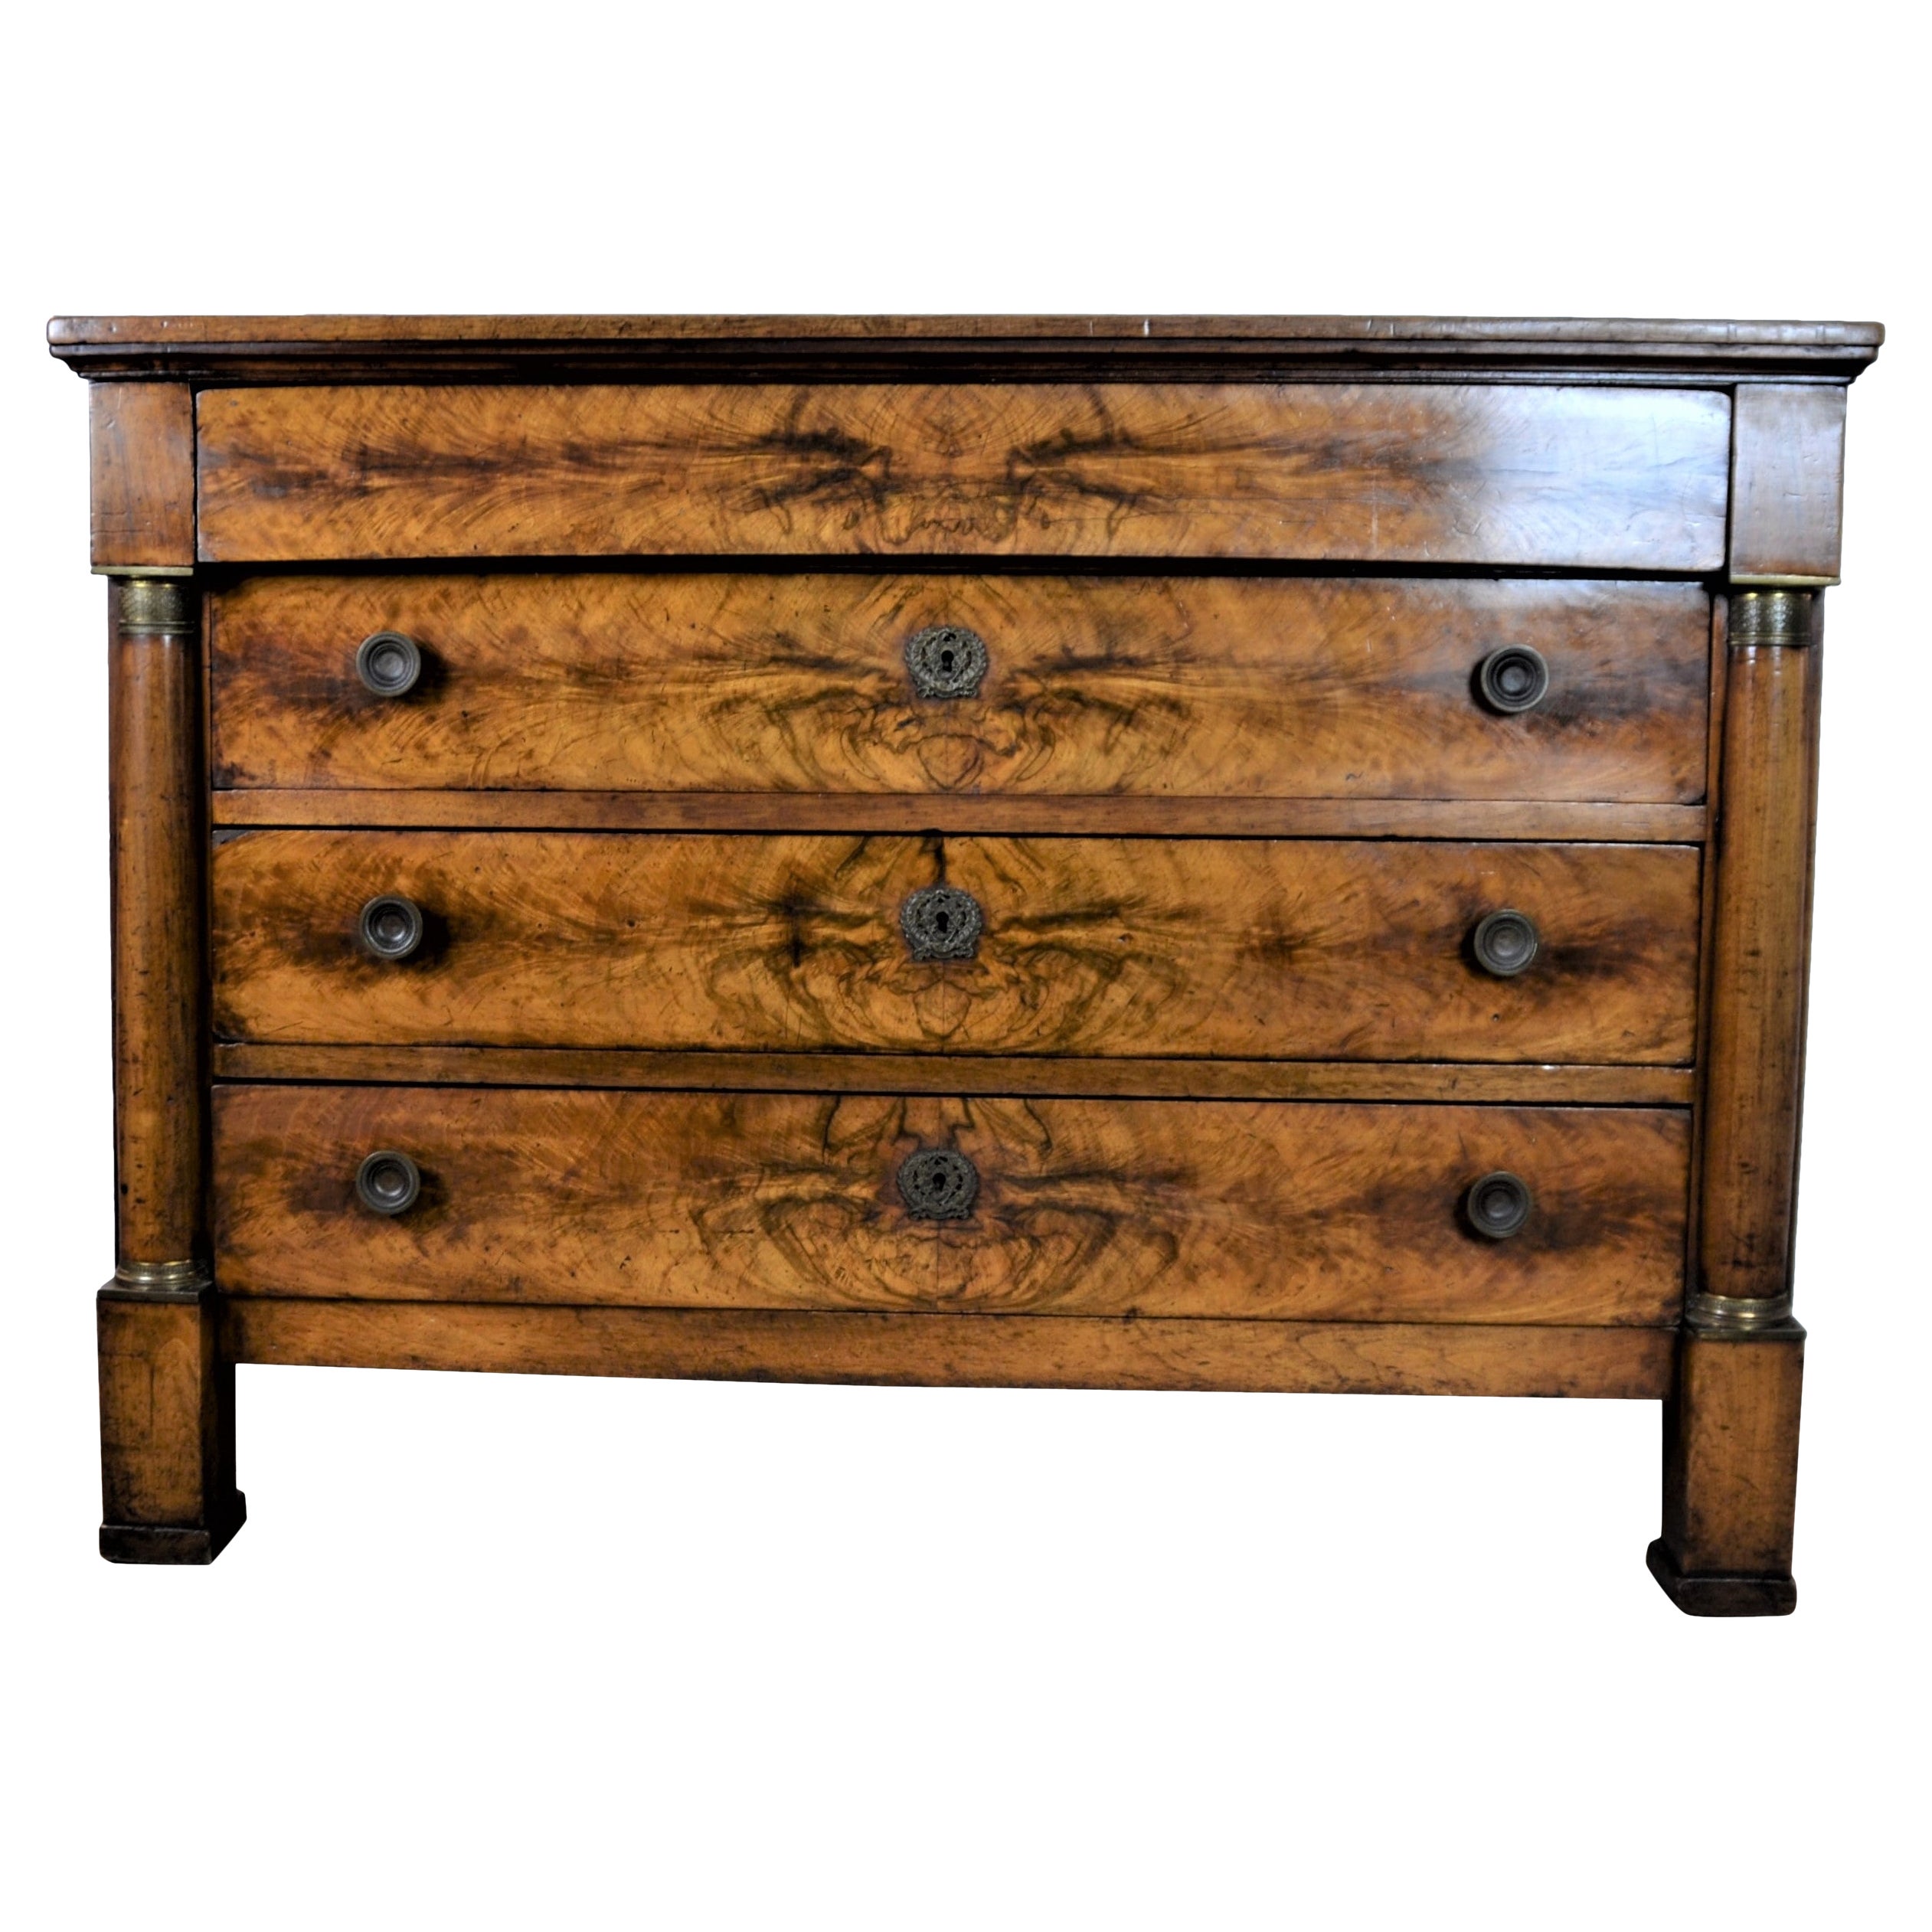 C.1830 French Empire Commode For Sale